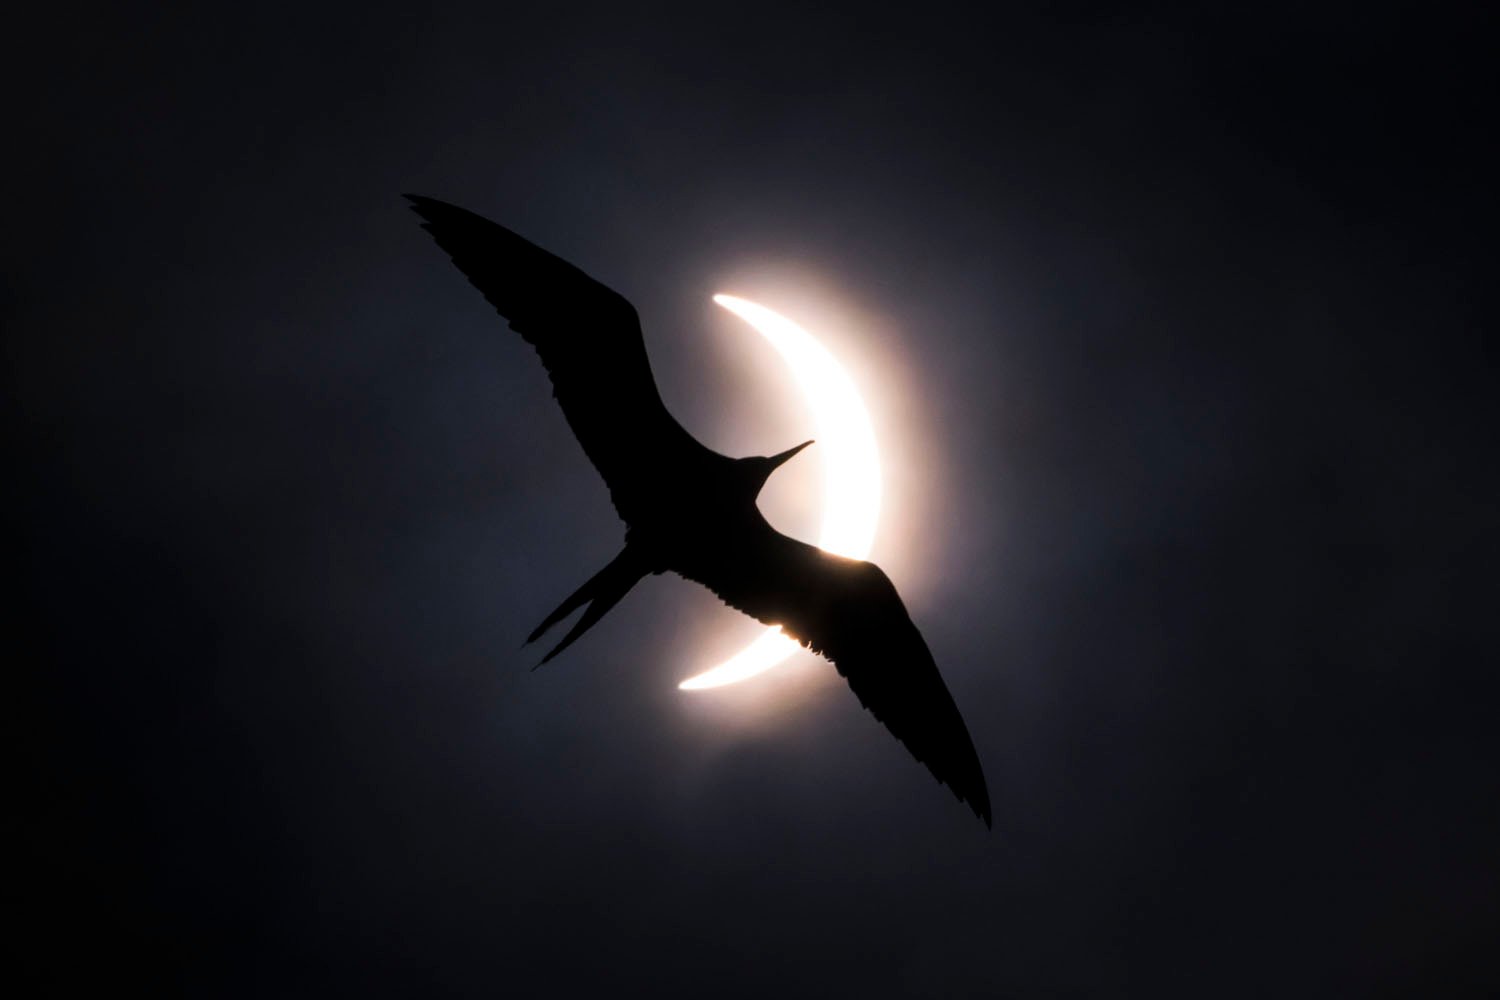 Silhouette of a bird flying in front of a partially eclipsed sun, creating a dramatic contrast between the bird's dark shape and the bright solar halo.